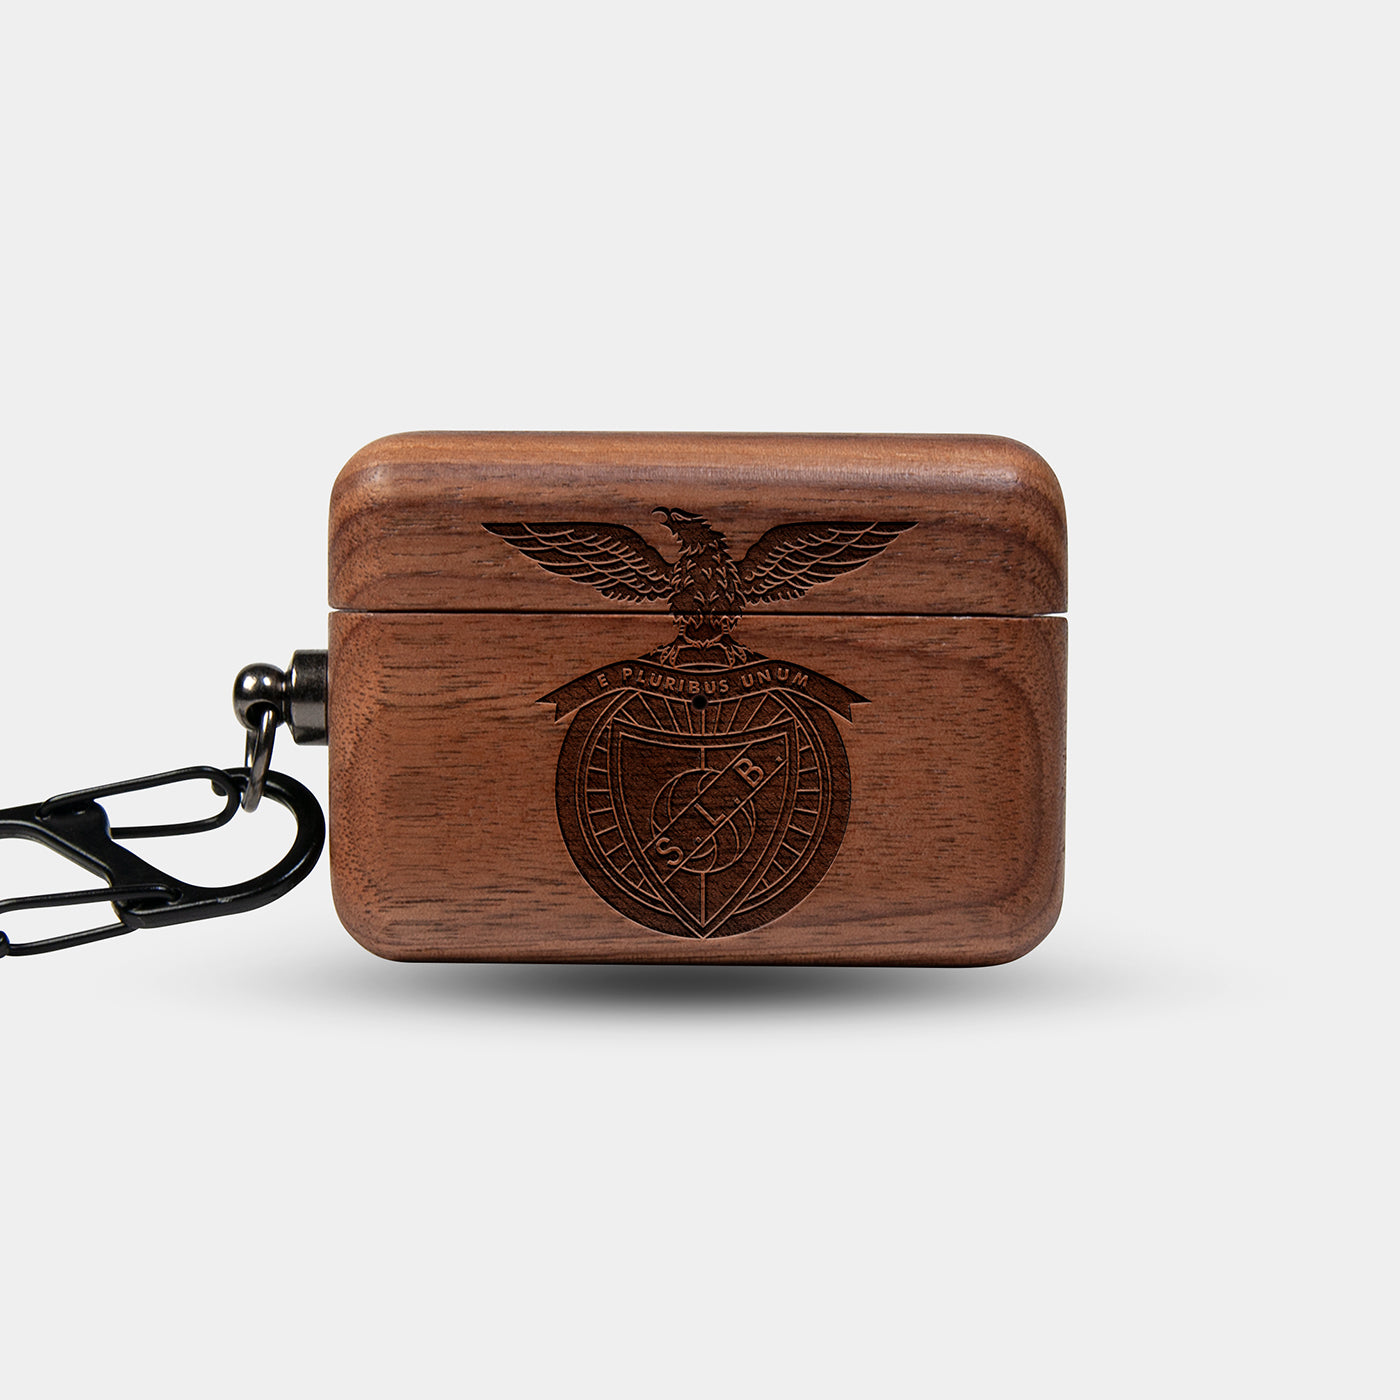 Custom S.L. Benfica AirPods Cases | AirPods | AirPods Pro | AirPods Pro 2 Case - Carved Wood S.L. Benfica AirPods Cover - Eco-friendly Sl Benfica AirPods Case - Custom Sl Benfica Gift For Him - Monogrammed Personalized AirPods Cover By Engraved In Nature